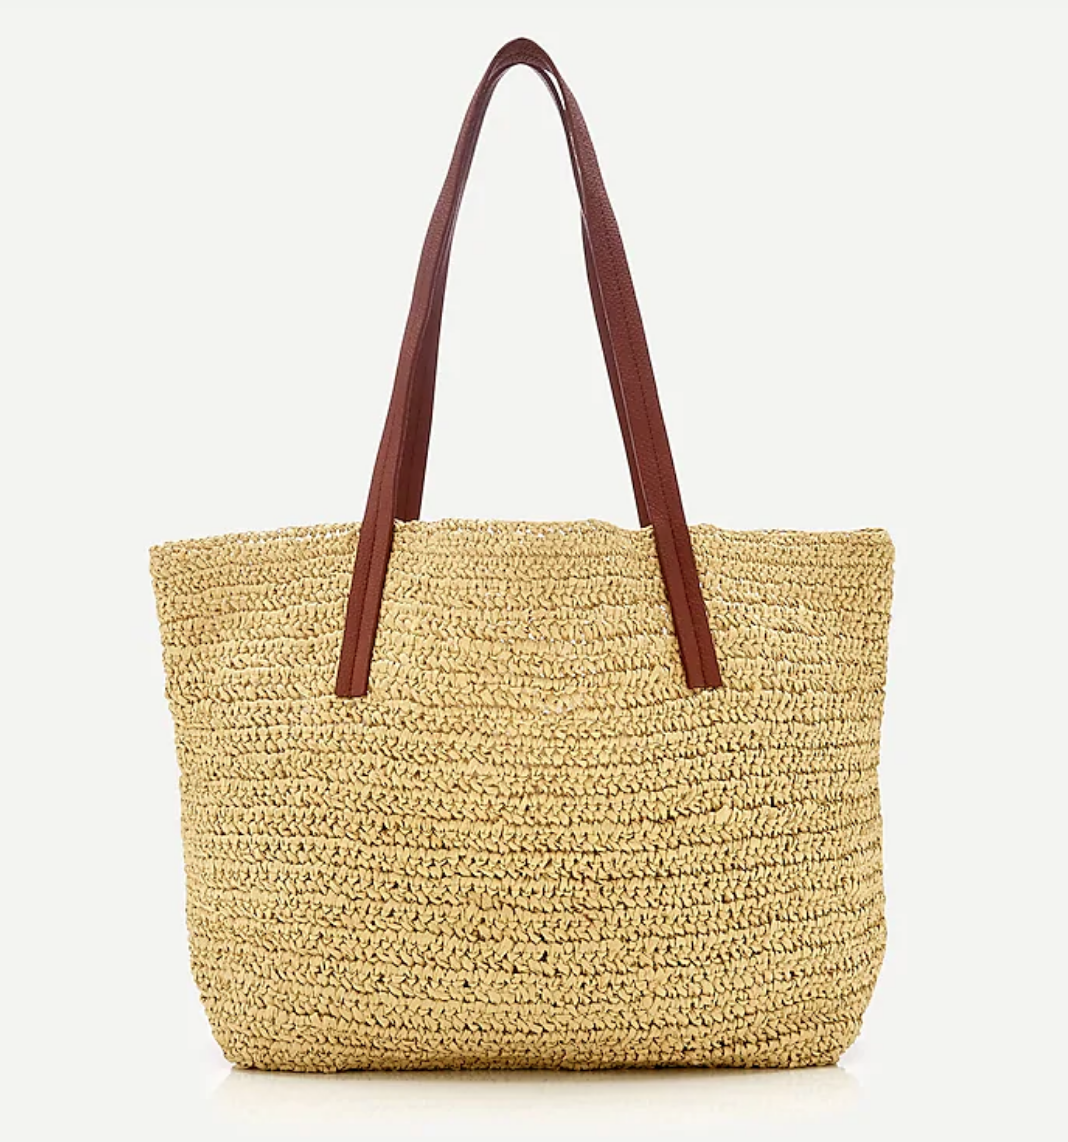 Woven market tote - $79.50 from J Crew